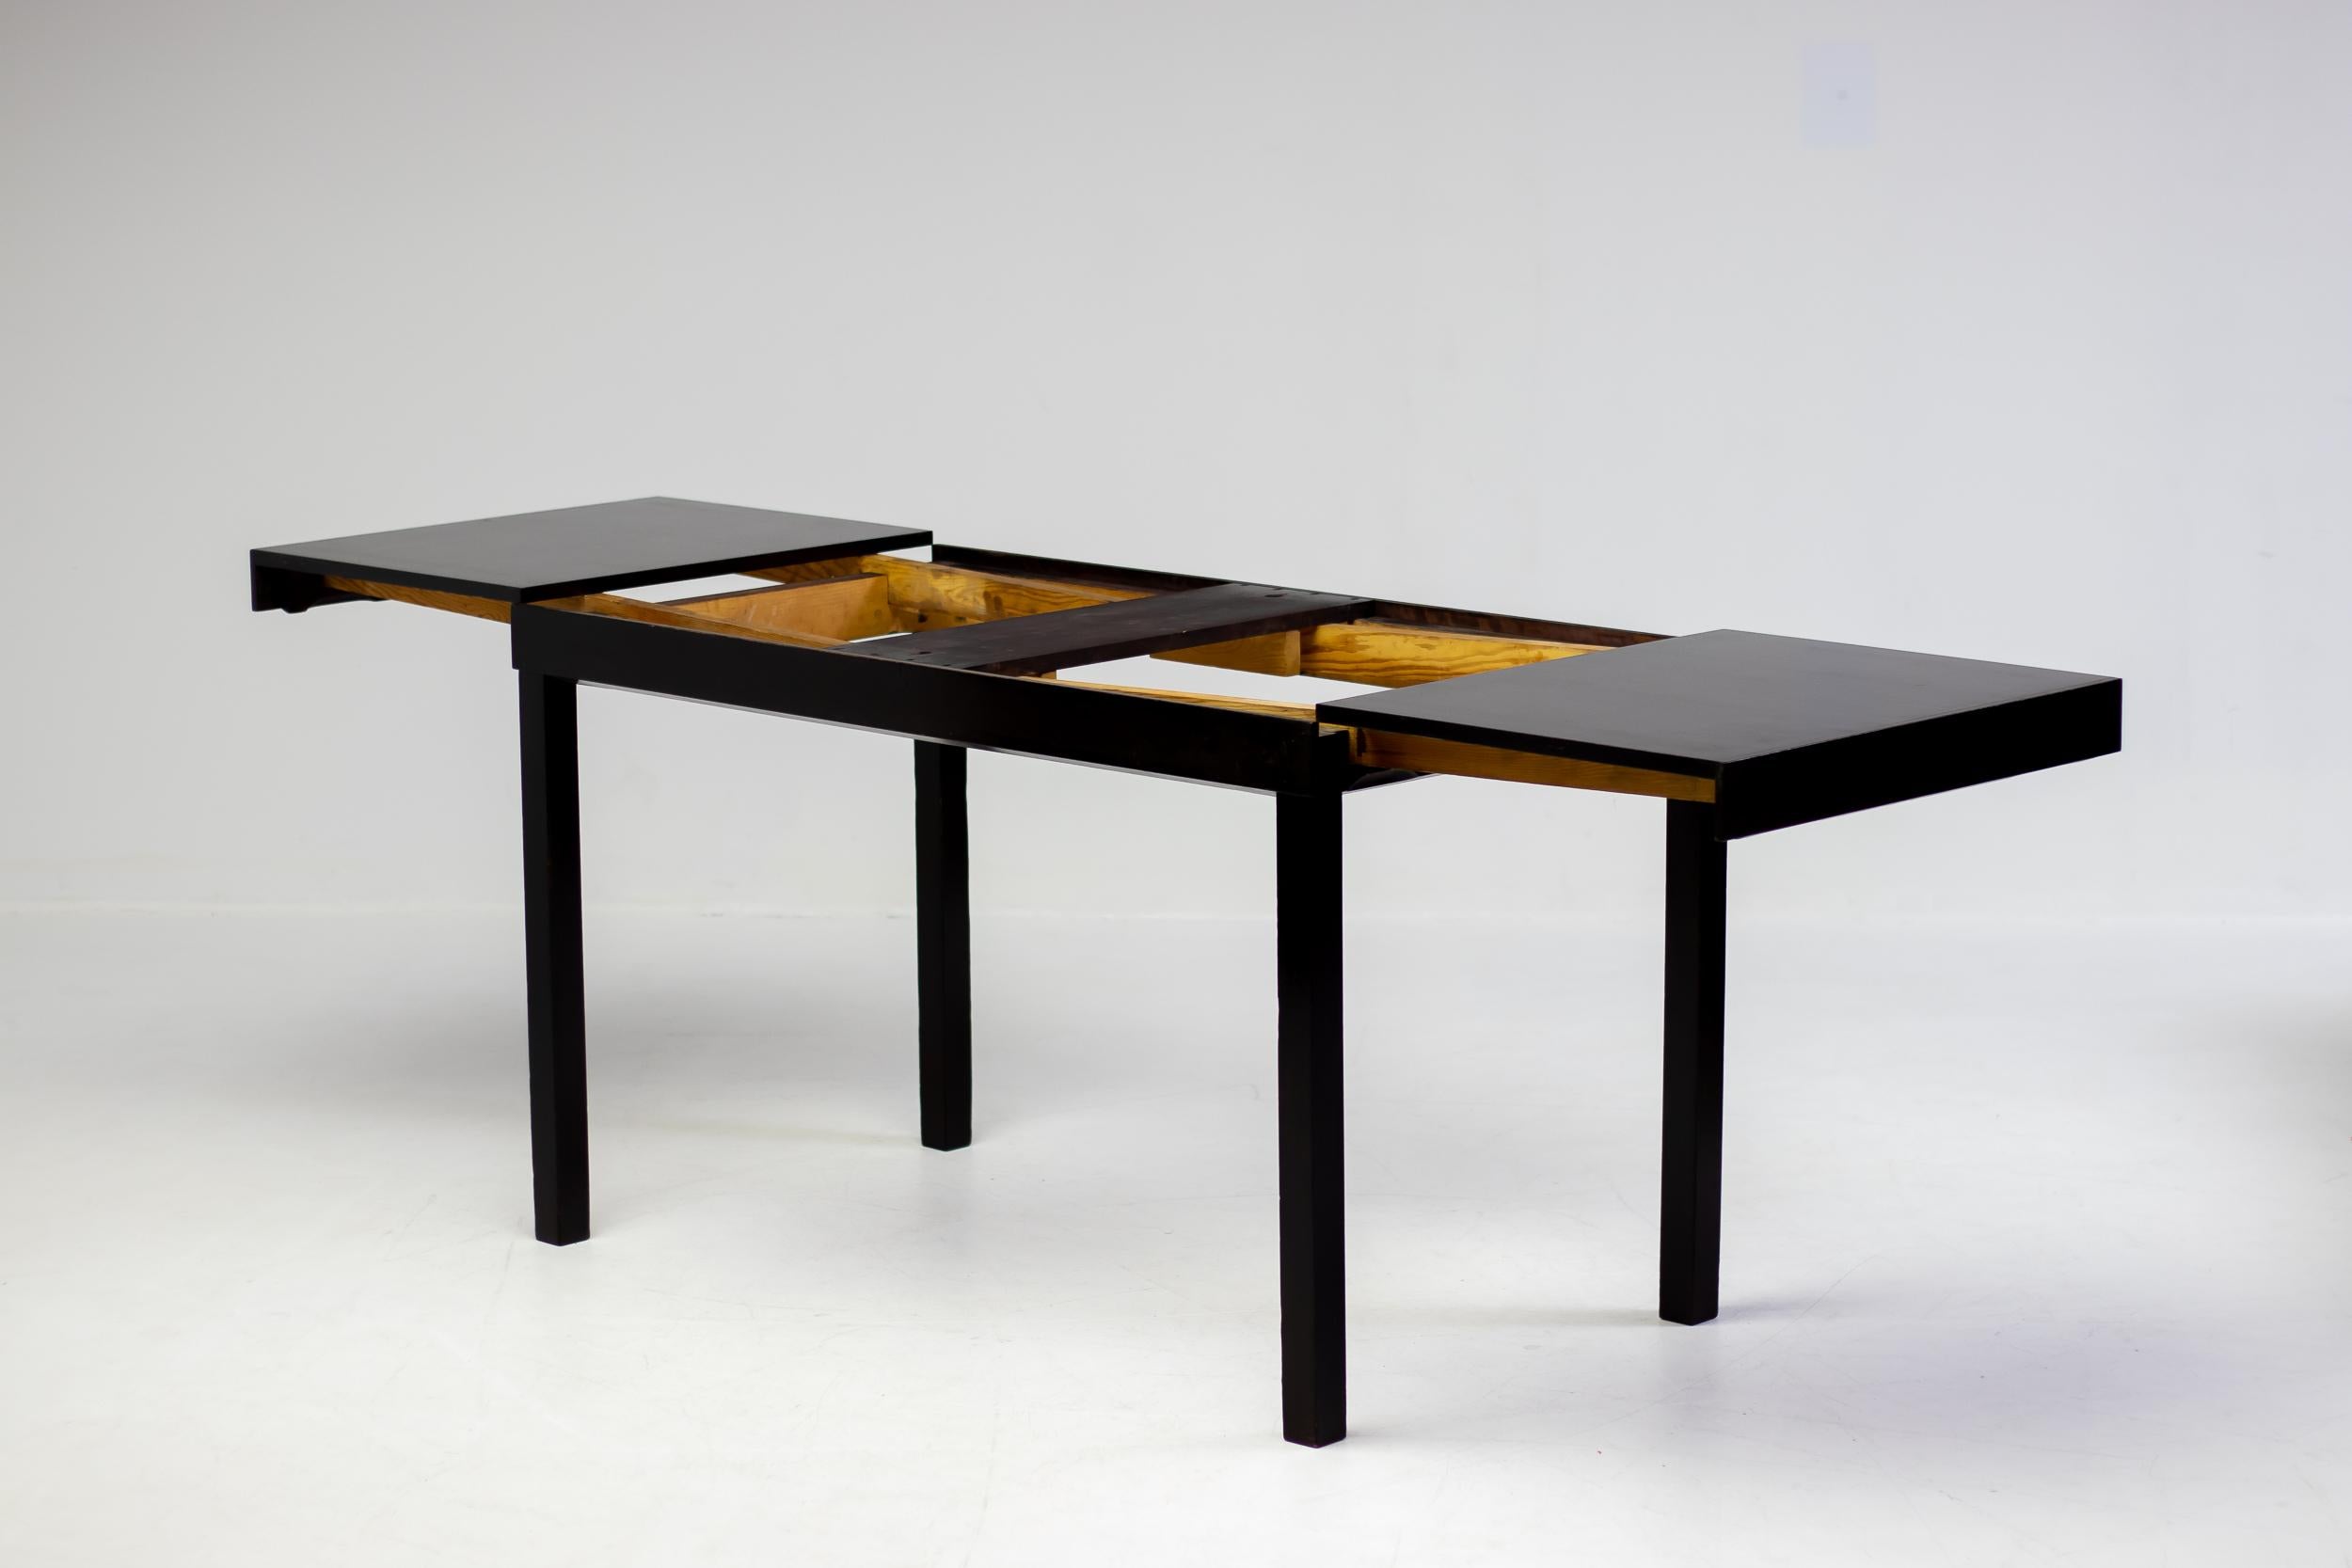 This beautiful Scandinavian Modern extendable dining table or writing desk is designed by Axel Einar Hjorth for NK in the 1930s.  The base and extension leaves are lacquered in a wonderful very dark brown chocolate color, the top is veneered in book